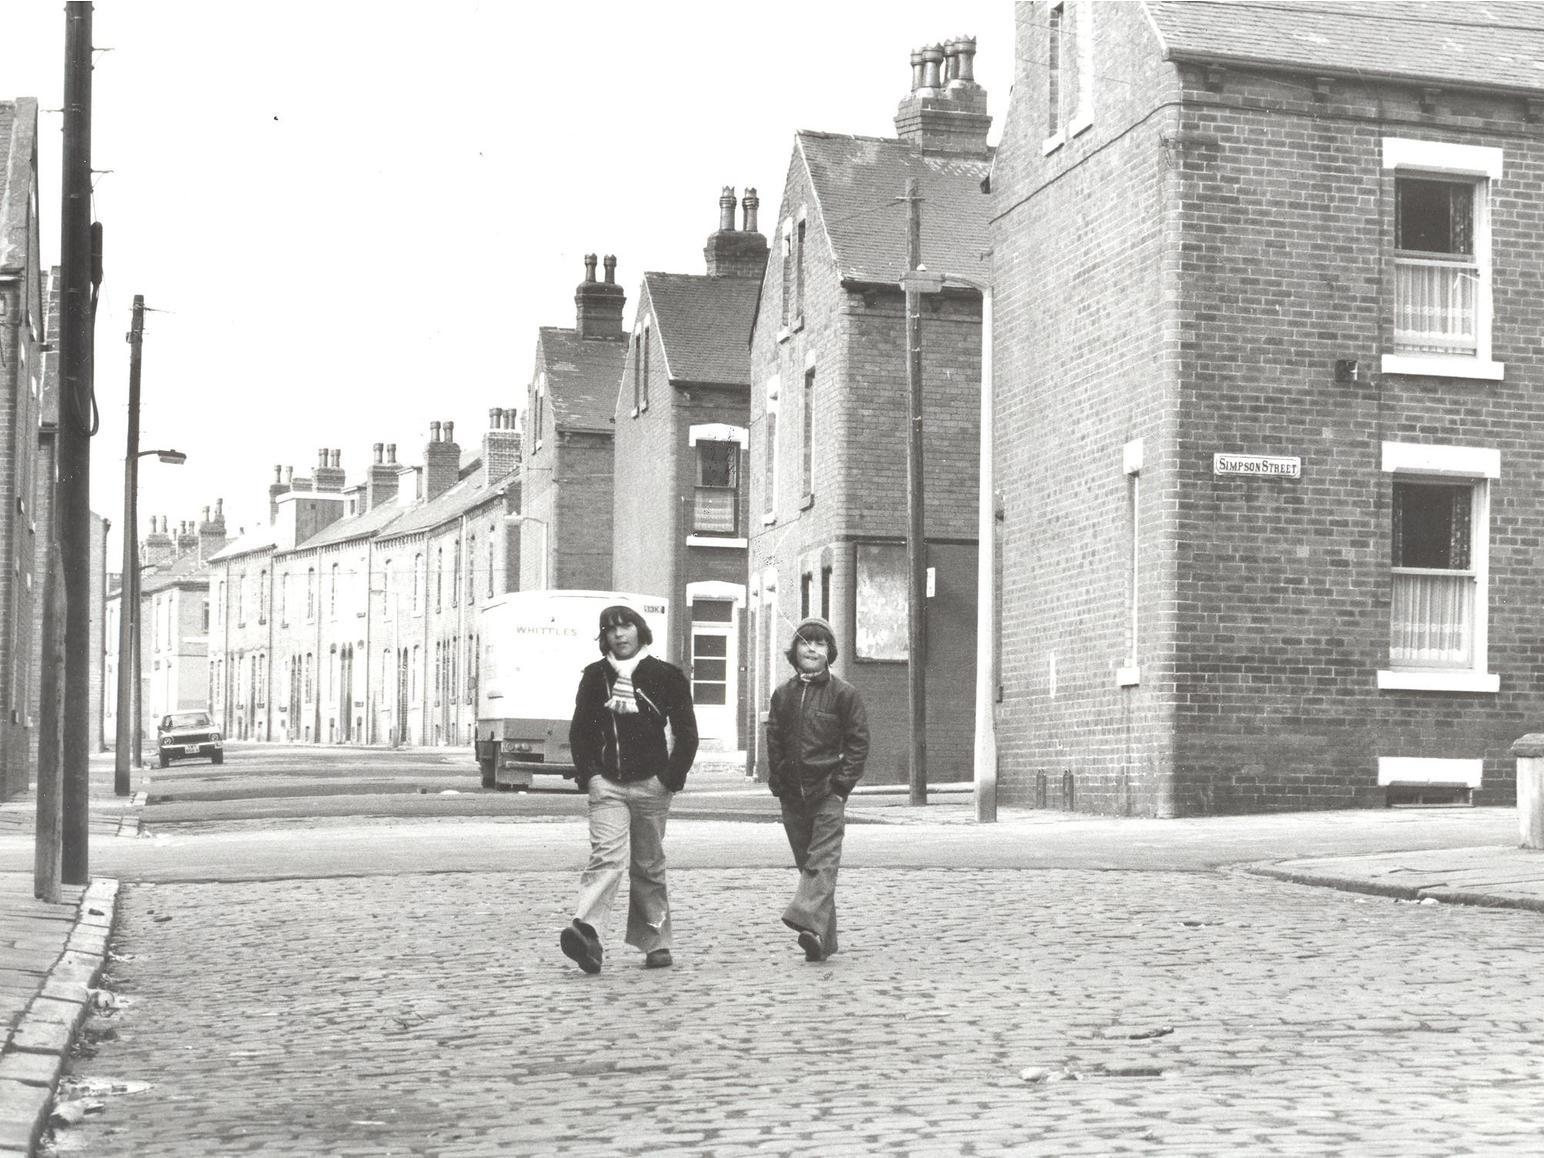 Middle Cross Street in Armley. One of the lads on this photo is wearing a Leeds United scarf.